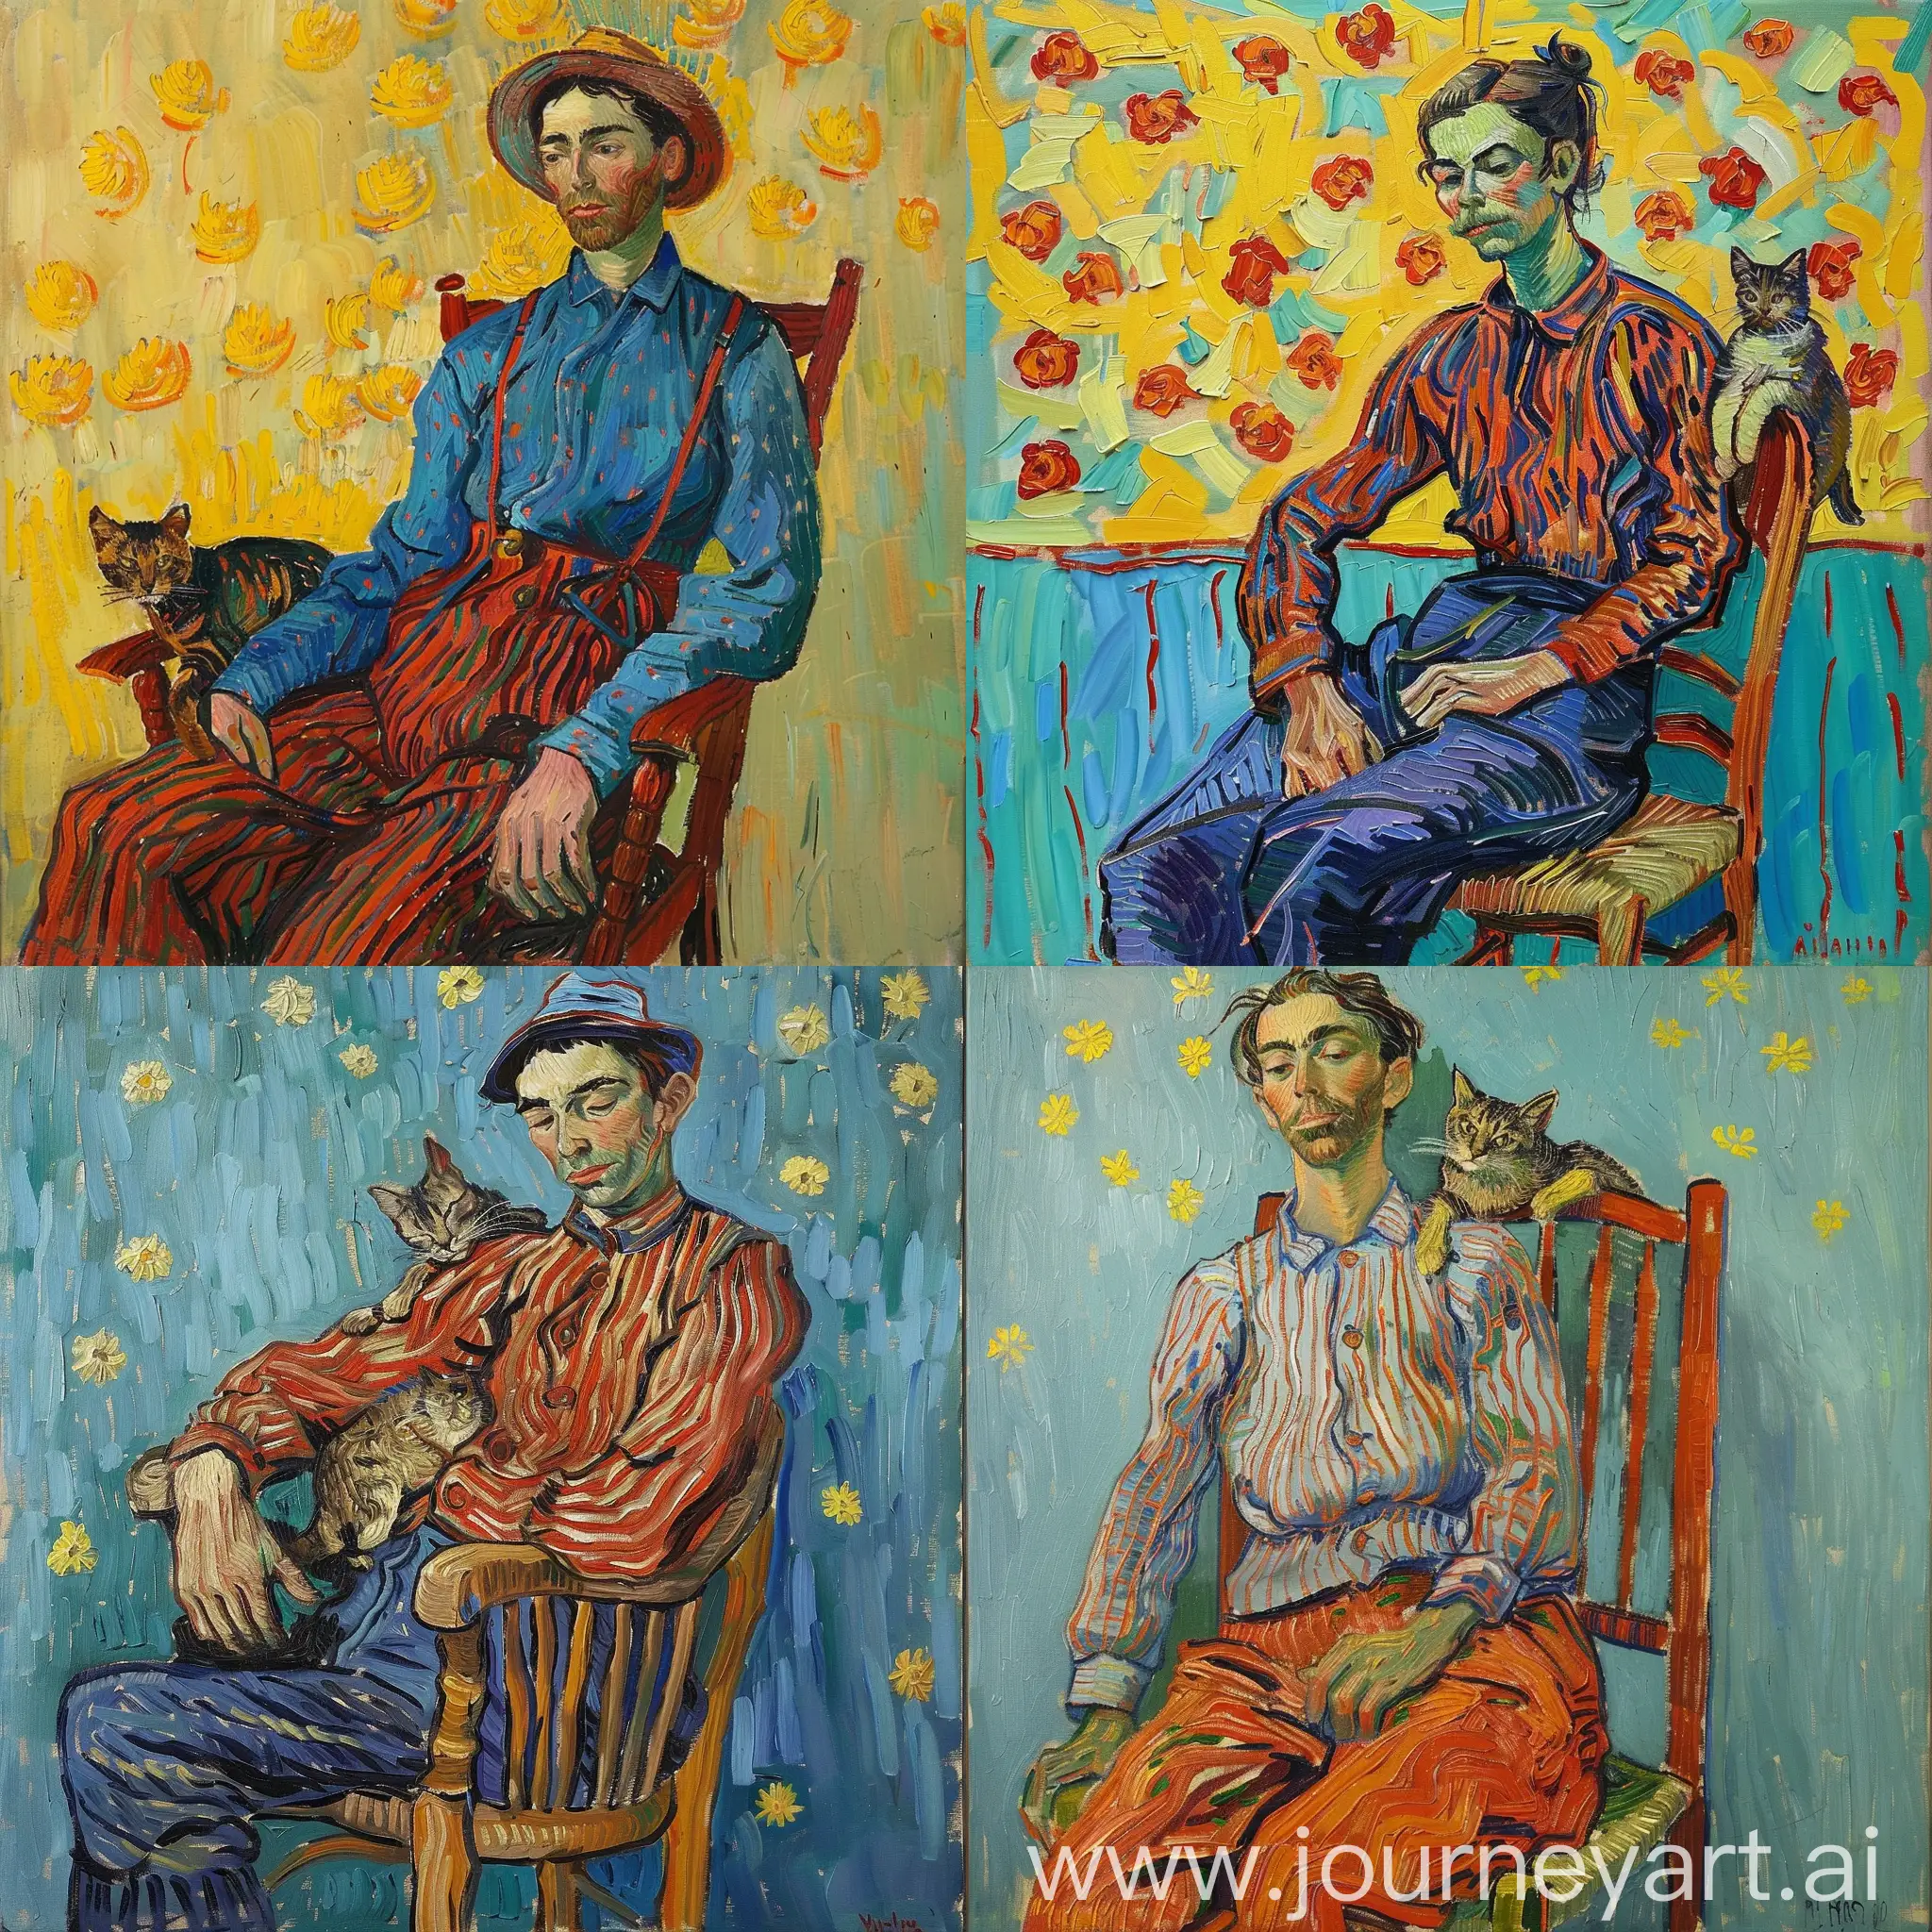 Man-Sitting-on-Chair-with-Cat-Van-Gogh-Style-Oil-Painting